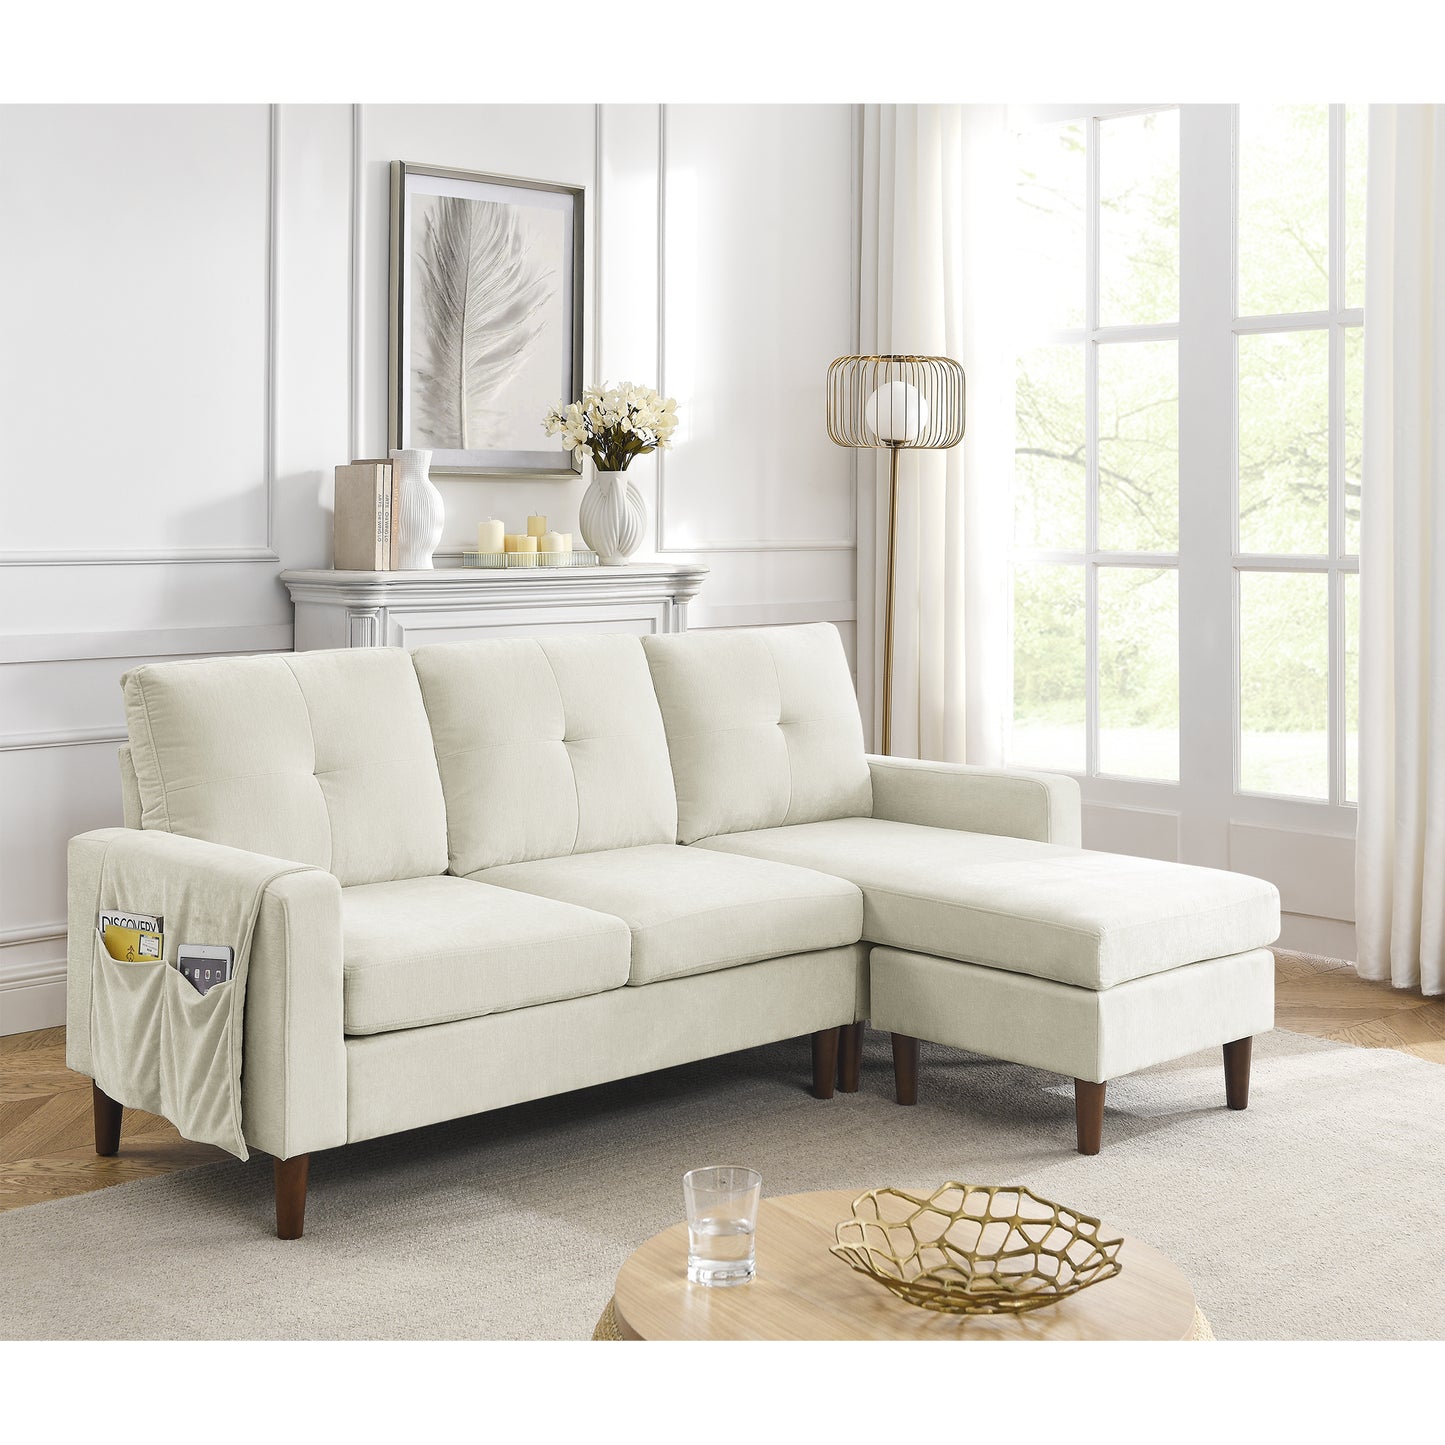 Sectional Sofa Couch; 3 Seats L-shape Sofa with Removable Cushions